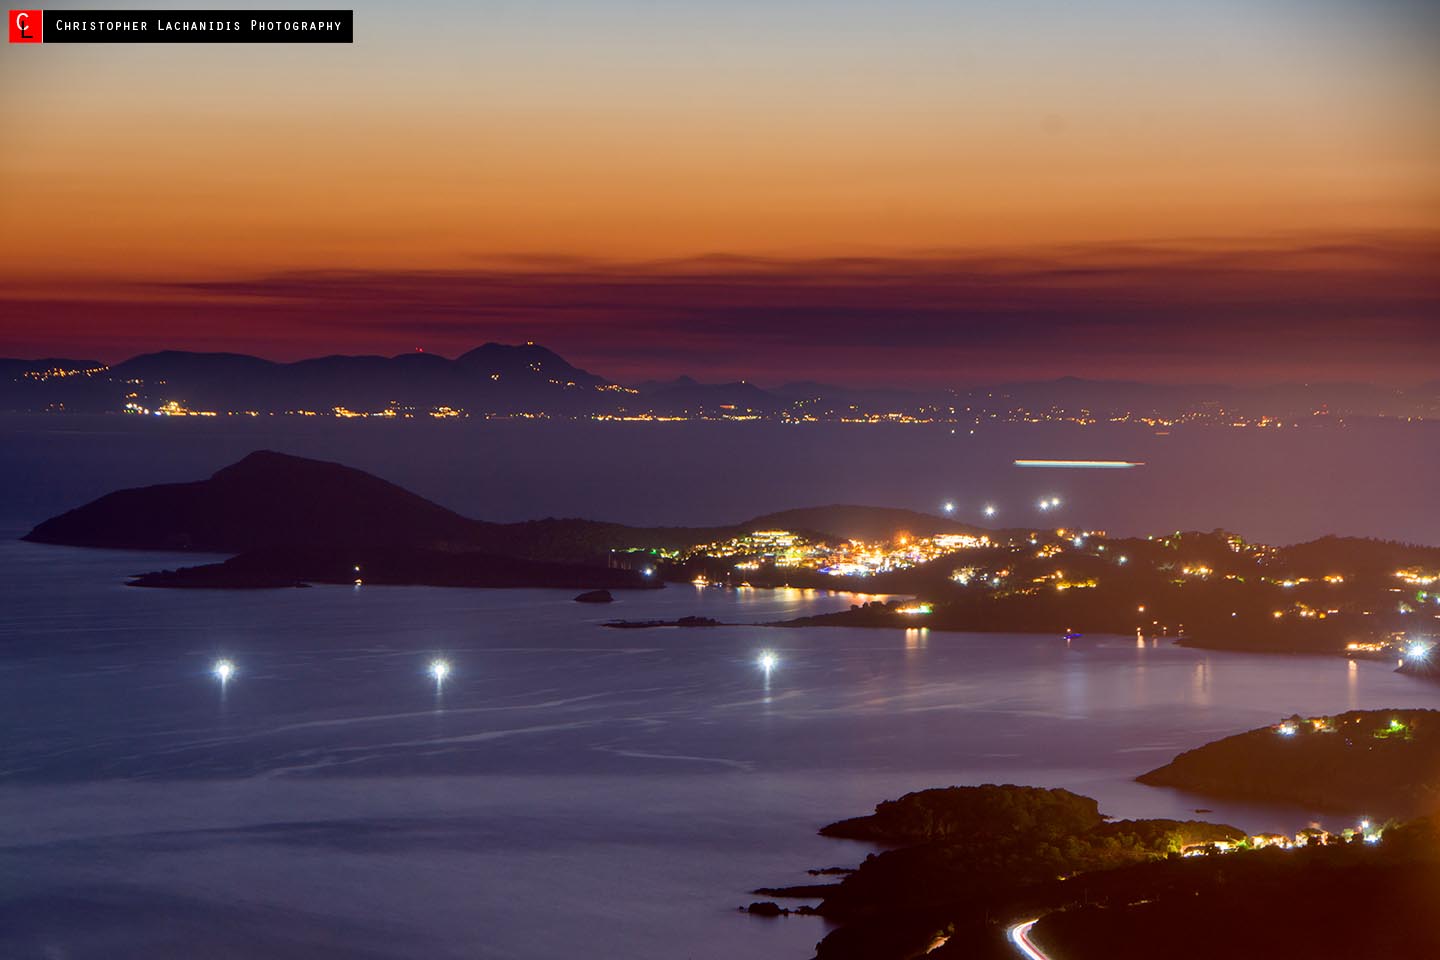 Shortly after sunset at Paratiritirio site overlooking Sivota and Corfu!